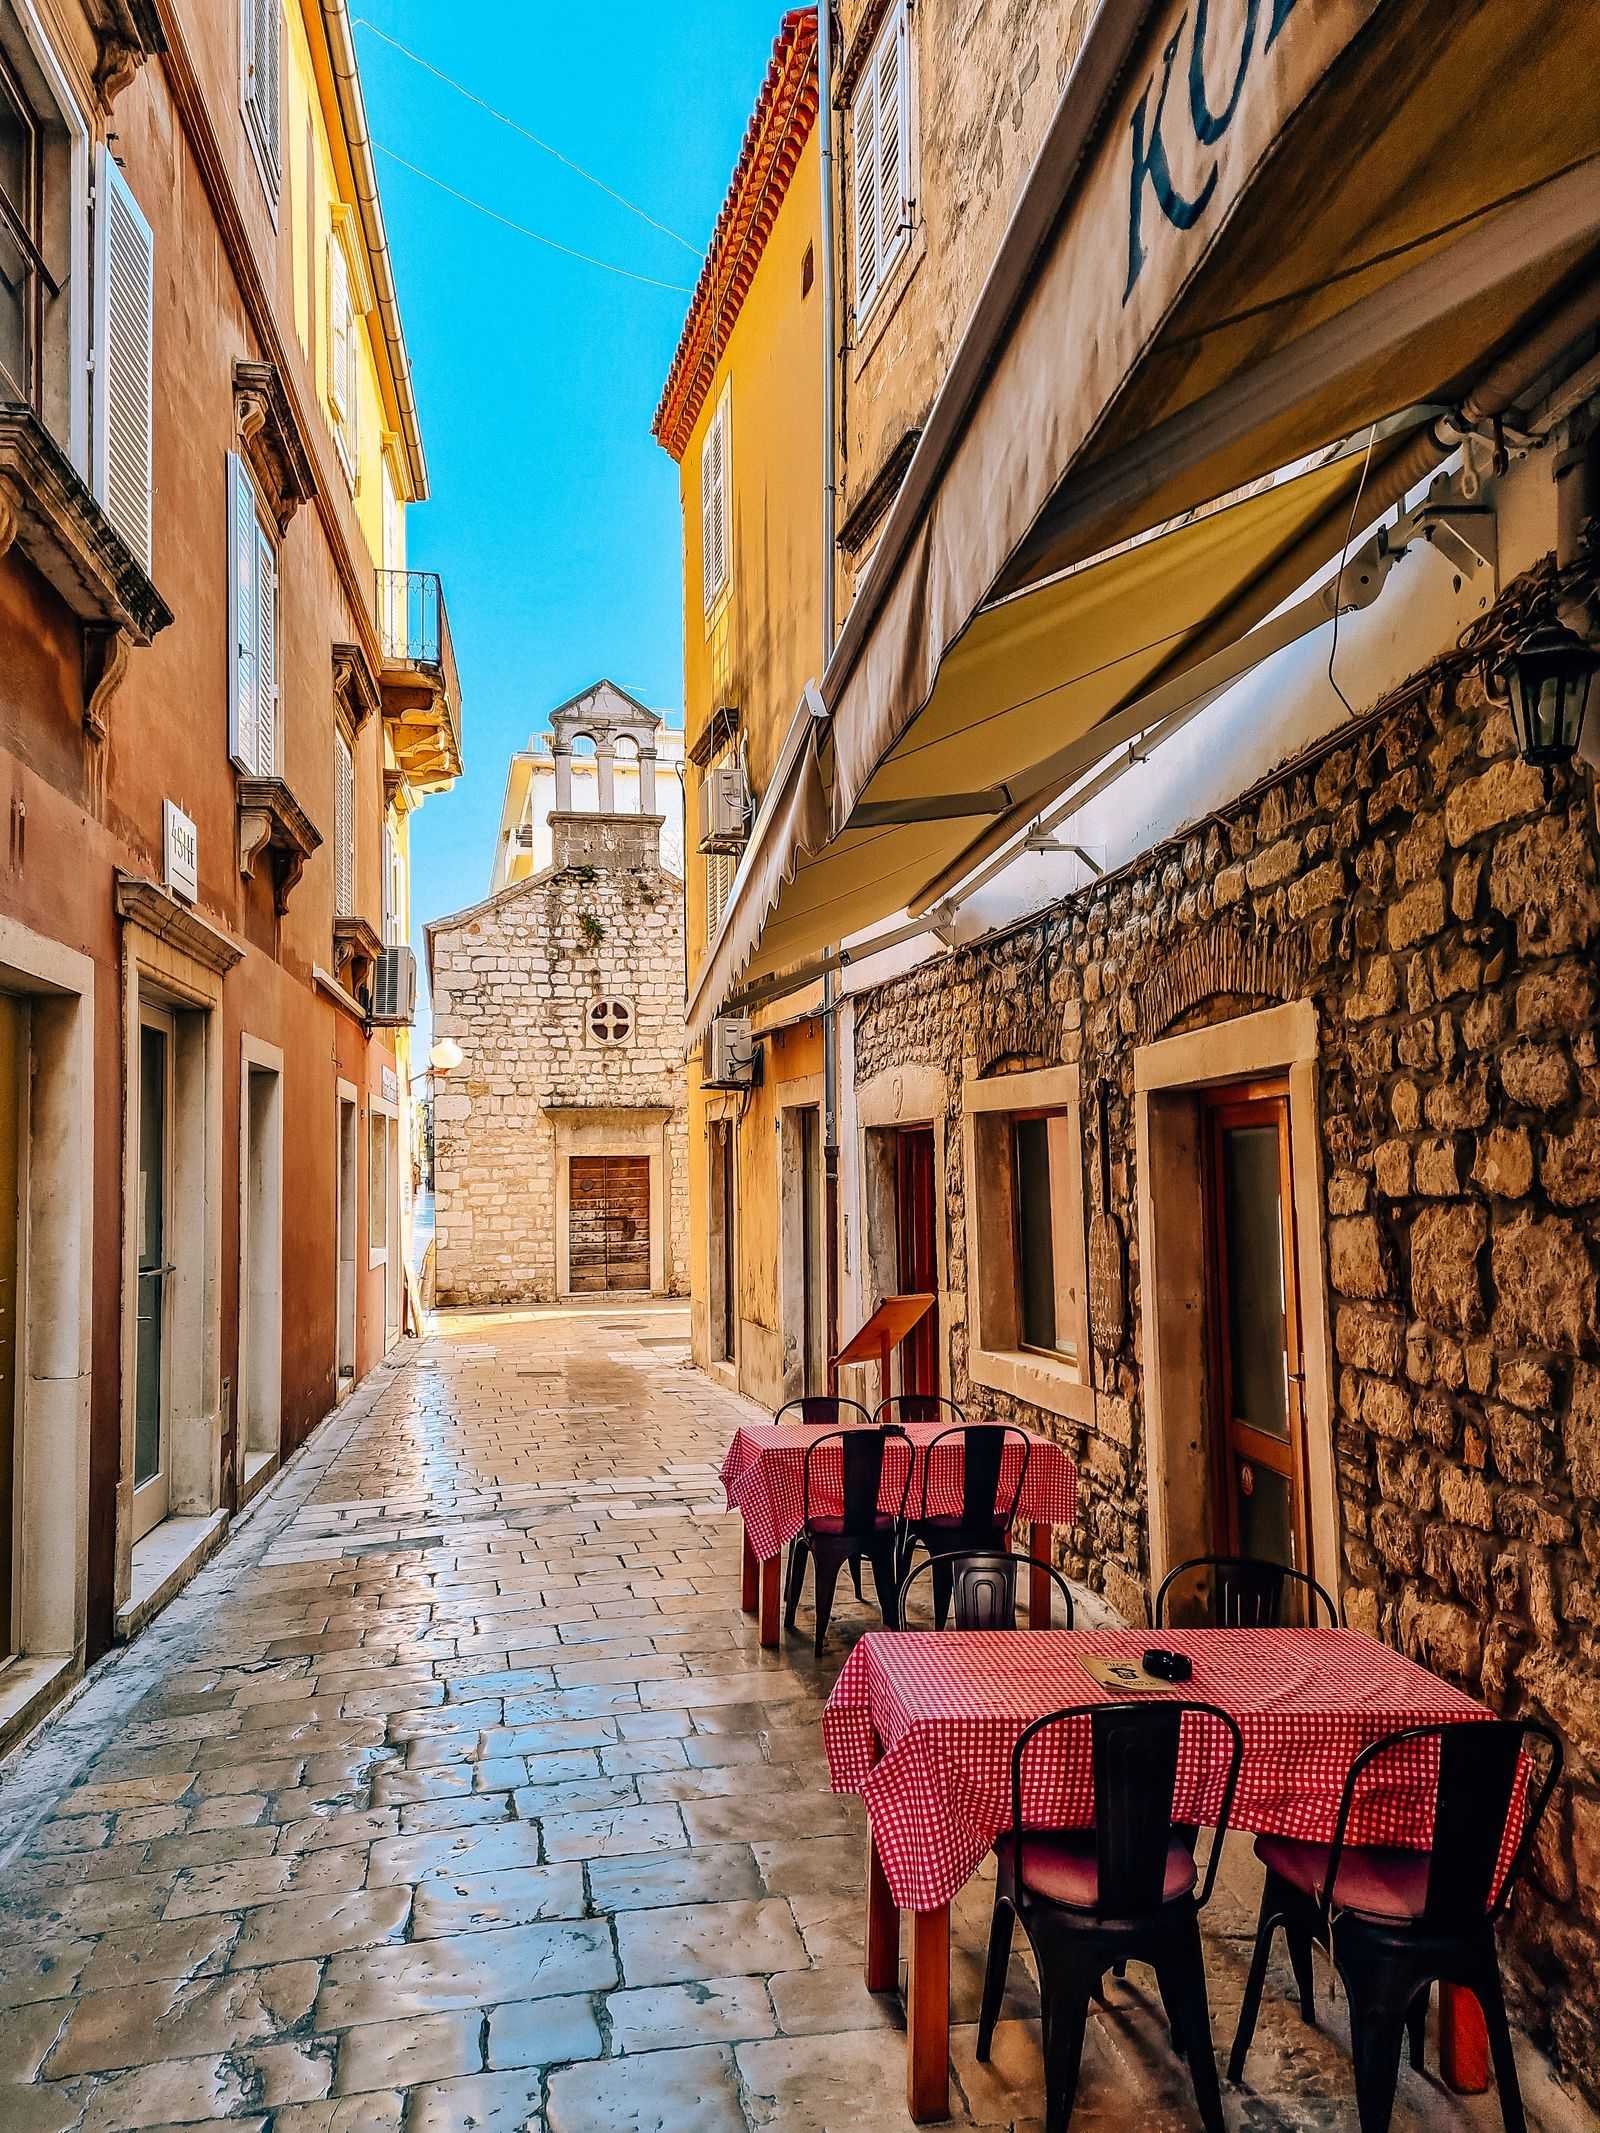 Red checked table clothed outdoor seating outside a stone restaurant with a narrow polished stone street leading to a old church.